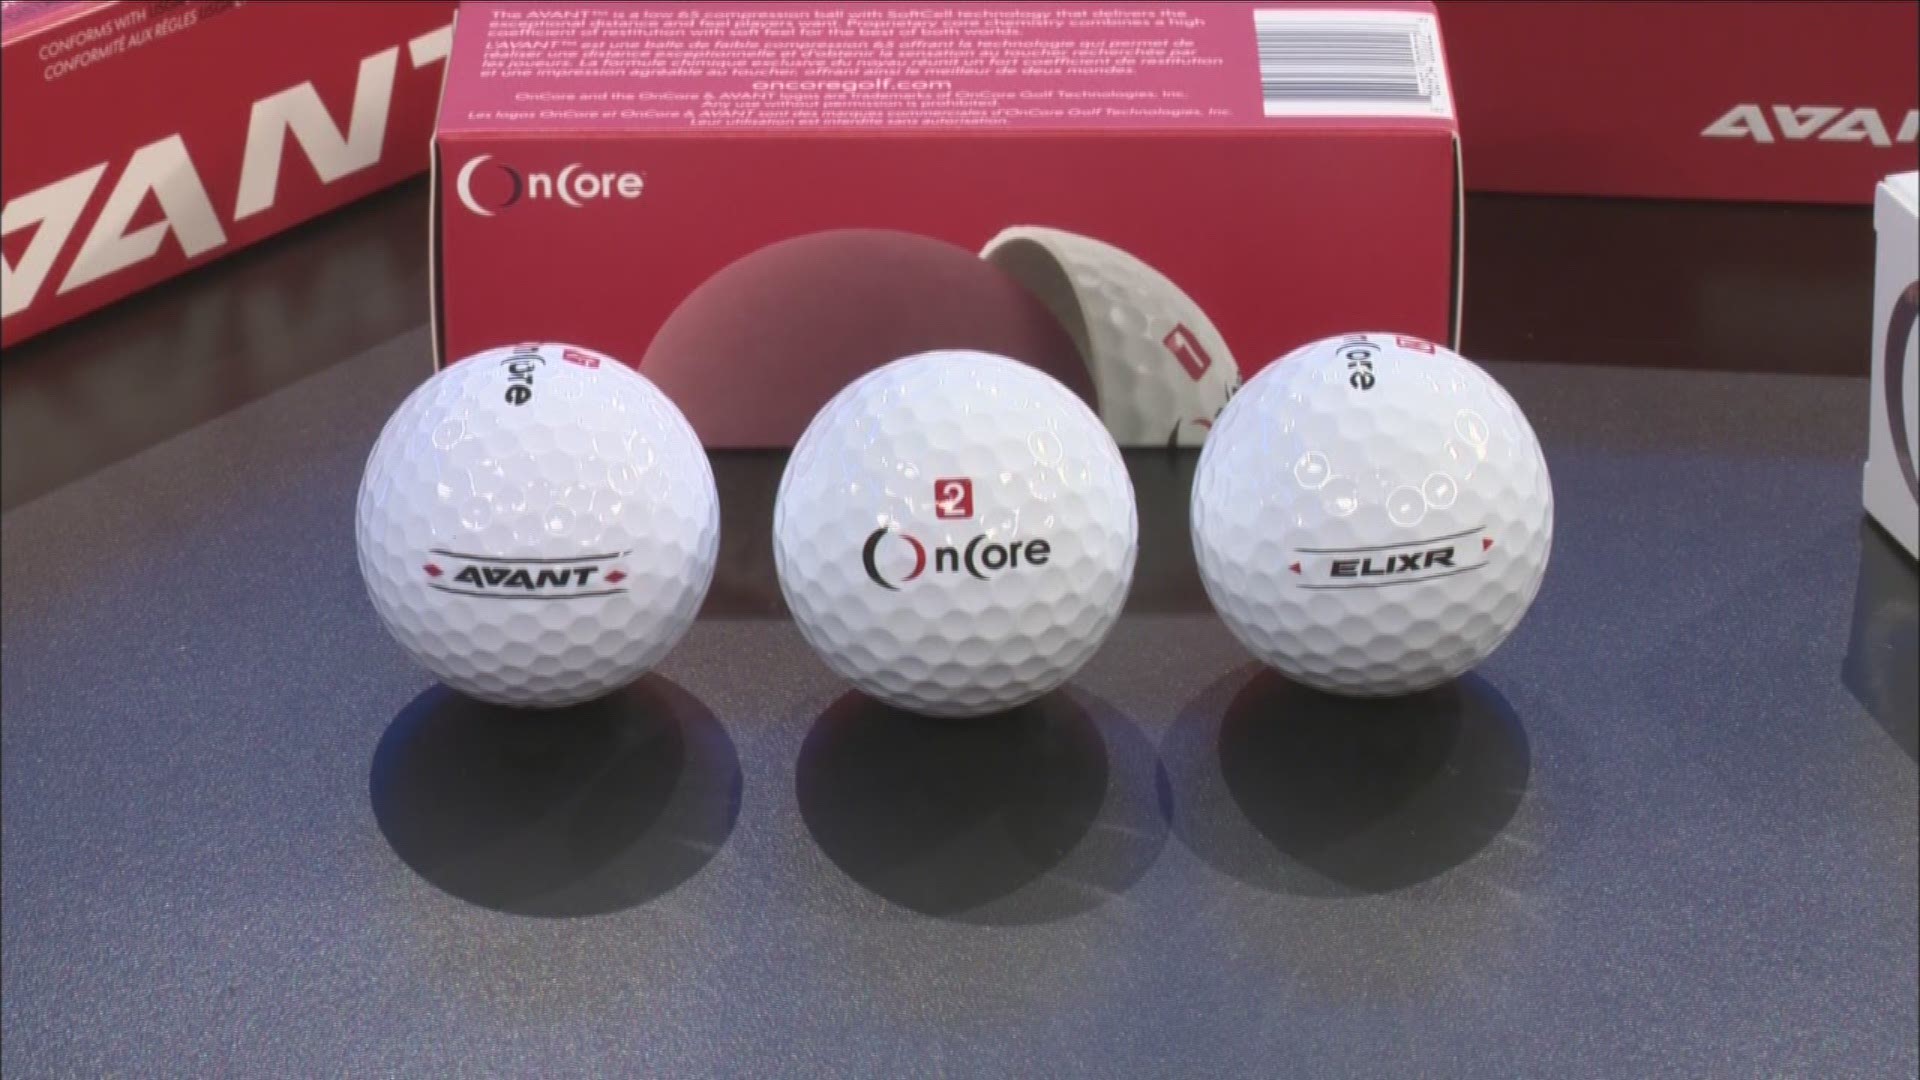 Kevin Sylvester sits down with the founders of OnCore golf to look at the variety of golf balls to improve your game.